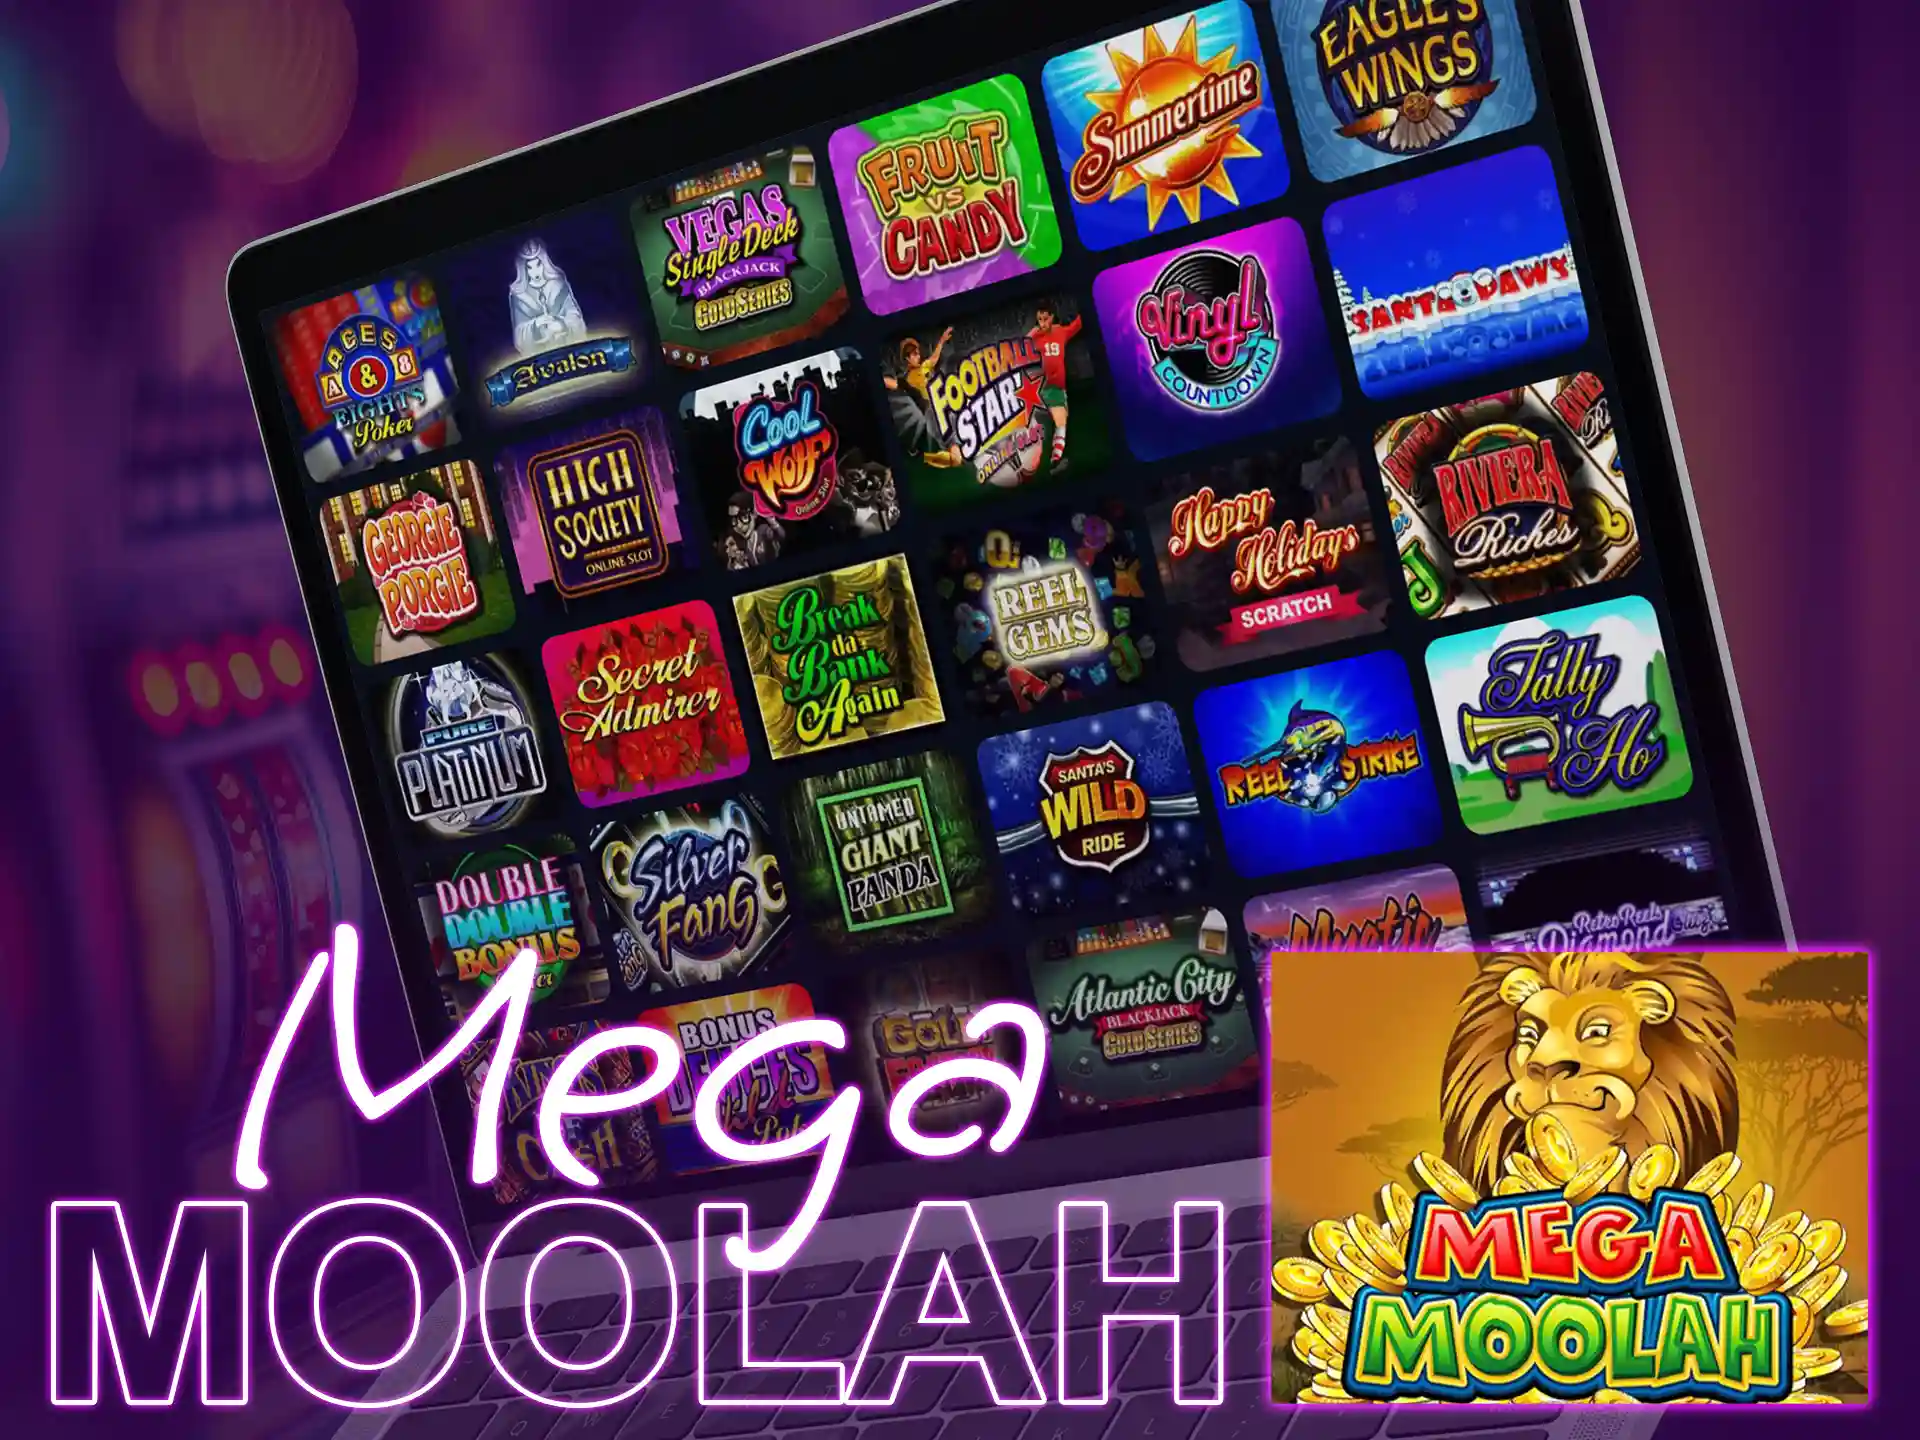 Try Mega Moolah which is the absolute top of the list of slots from Microgaming.